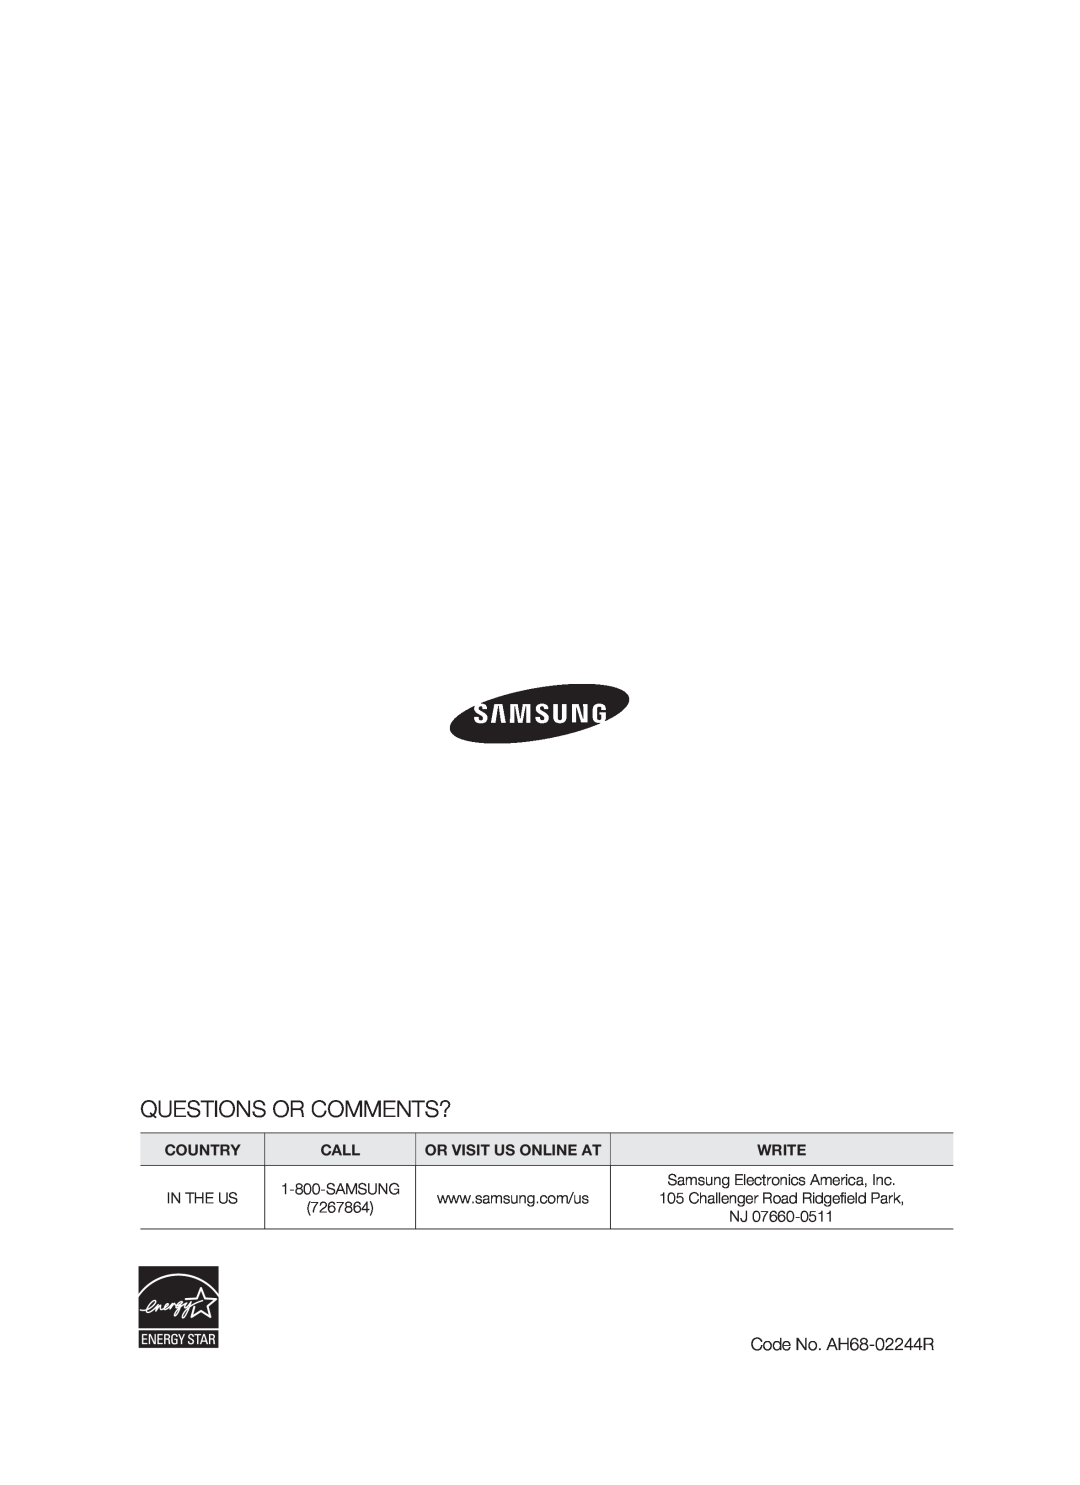 Samsung HT-BD8200 user manual Questions Or Comments?, Code No. AH68-02244R, Samsung 